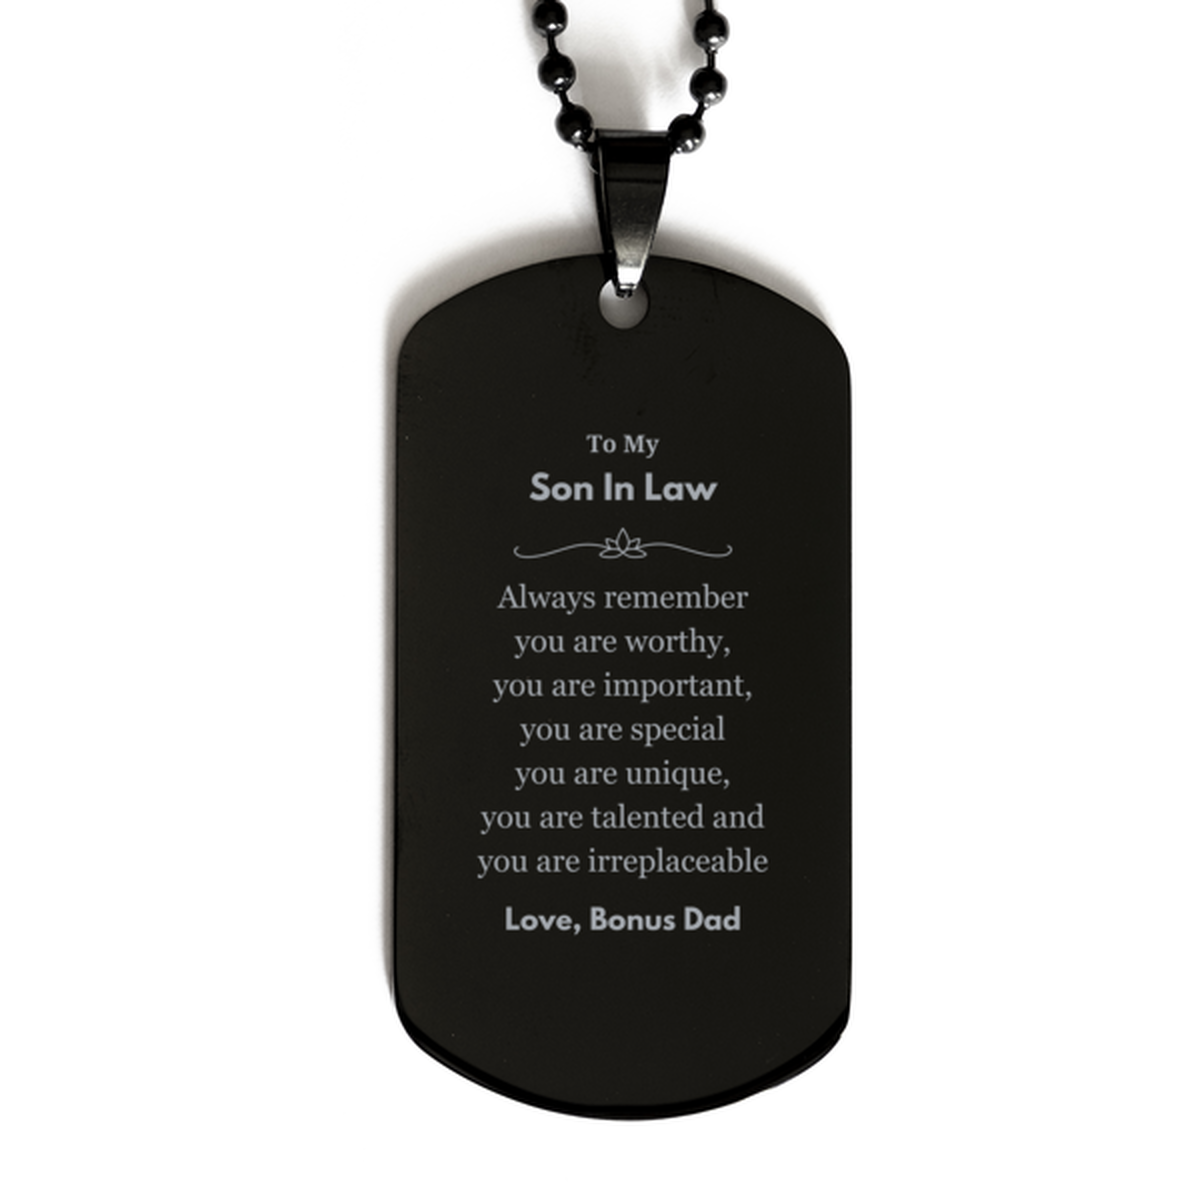 Son In Law Birthday Gifts from Bonus Dad, Inspirational Black Dog Tag for Son In Law Christmas Graduation Gifts for Son In Law Always remember you are worthy, you are important. Love, Bonus Dad